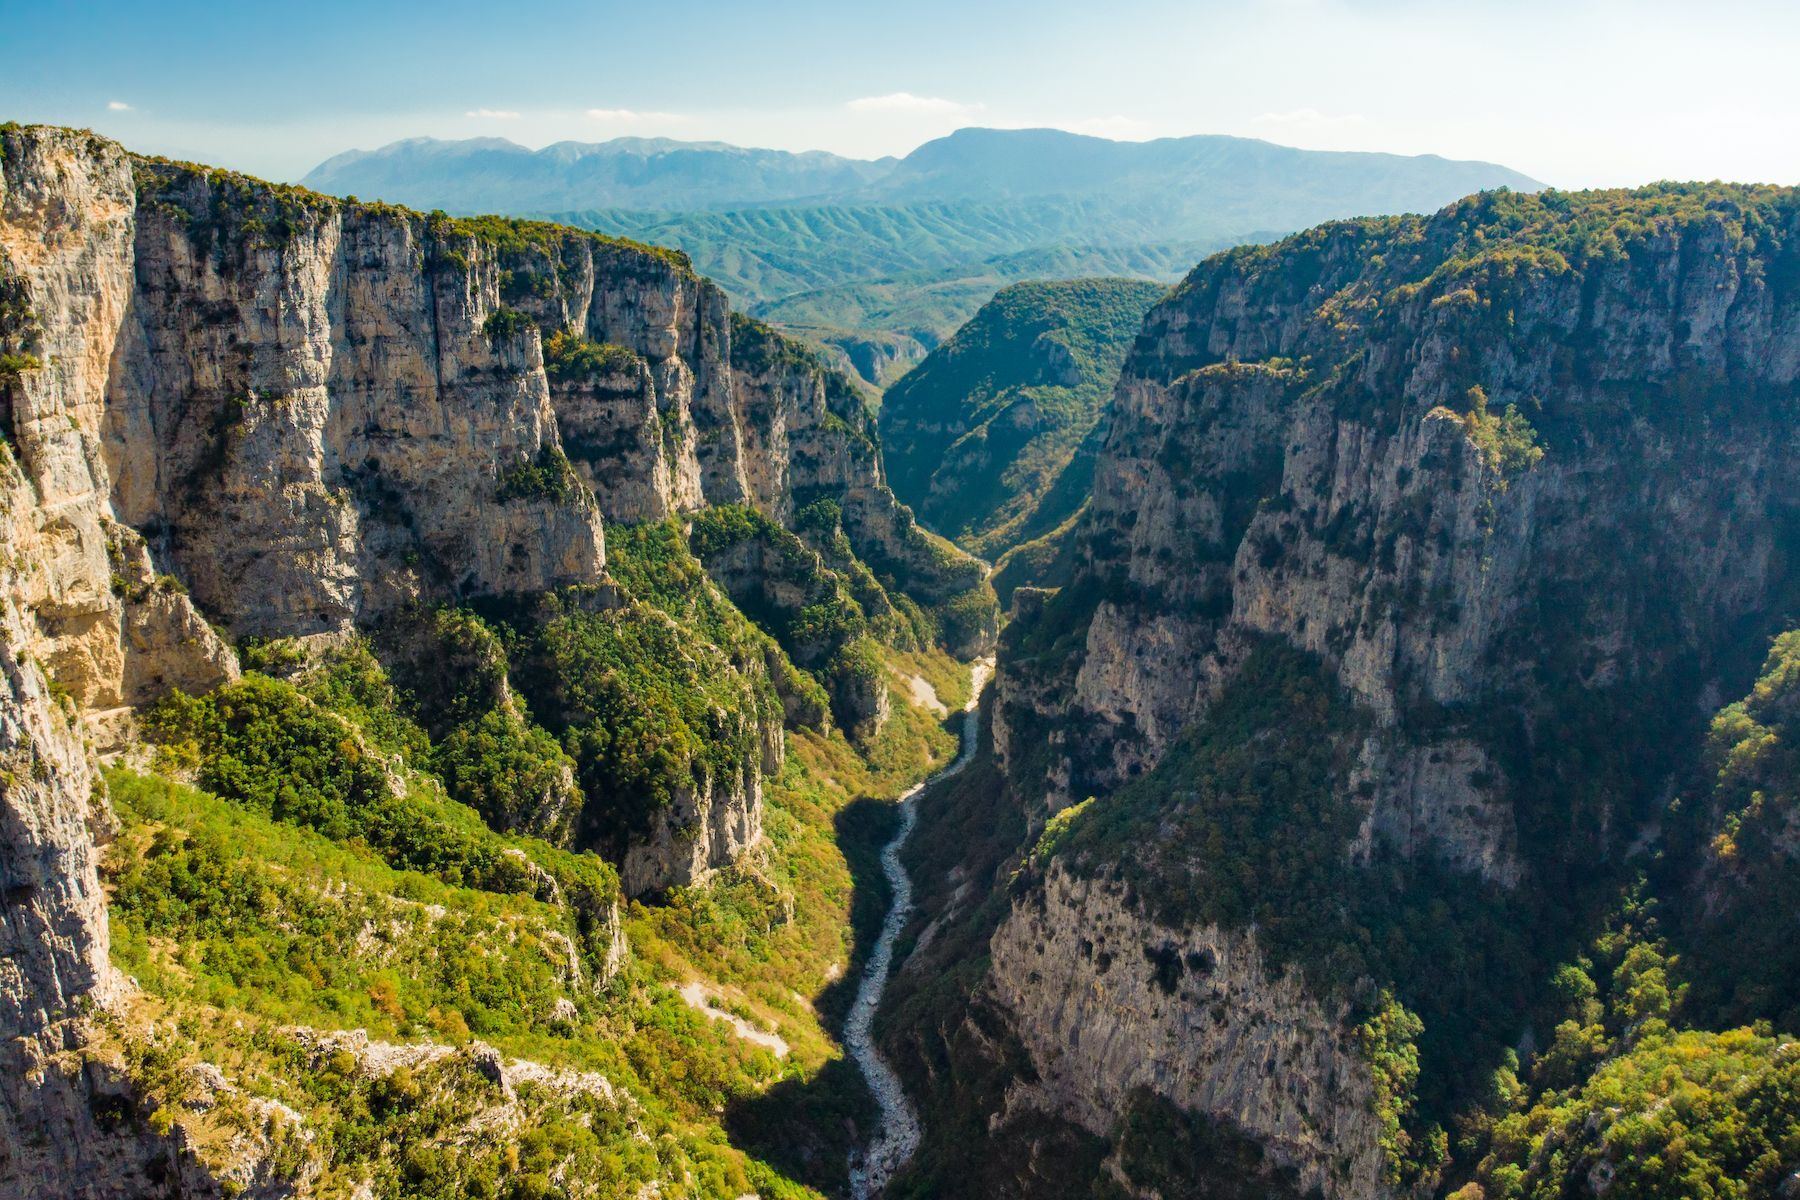 Located in northwestern Greece, the <a href="https://www.discovergreece.com/activities-tours/vikos-gorge-hike" rel="noreferrer noopener">Vikos Gorge</a> is sure to delight outdoor enthusiasts. The canyon’s vertiginous walls are among the deepest in the world, offering hikers truly magnificent scenery. Visitors may also wish to appreciate majestic Vikos from the <a href="https://expertworldtravel.com/hike/greece/beloi-viewpoint/" rel="noreferrer noopener">Beloi Viewpoint</a>, where they’ll enjoy amazing views of the surrounding villages. Located in the 12,000-hectare (49-square-mile) Vikos-Aoos National Park, this natural gem has been a <a href="https://en.unesco.org/global-geoparks/vikos-aoos" rel="noreferrer noopener">UNESCO</a> World Heritage site since 2015.